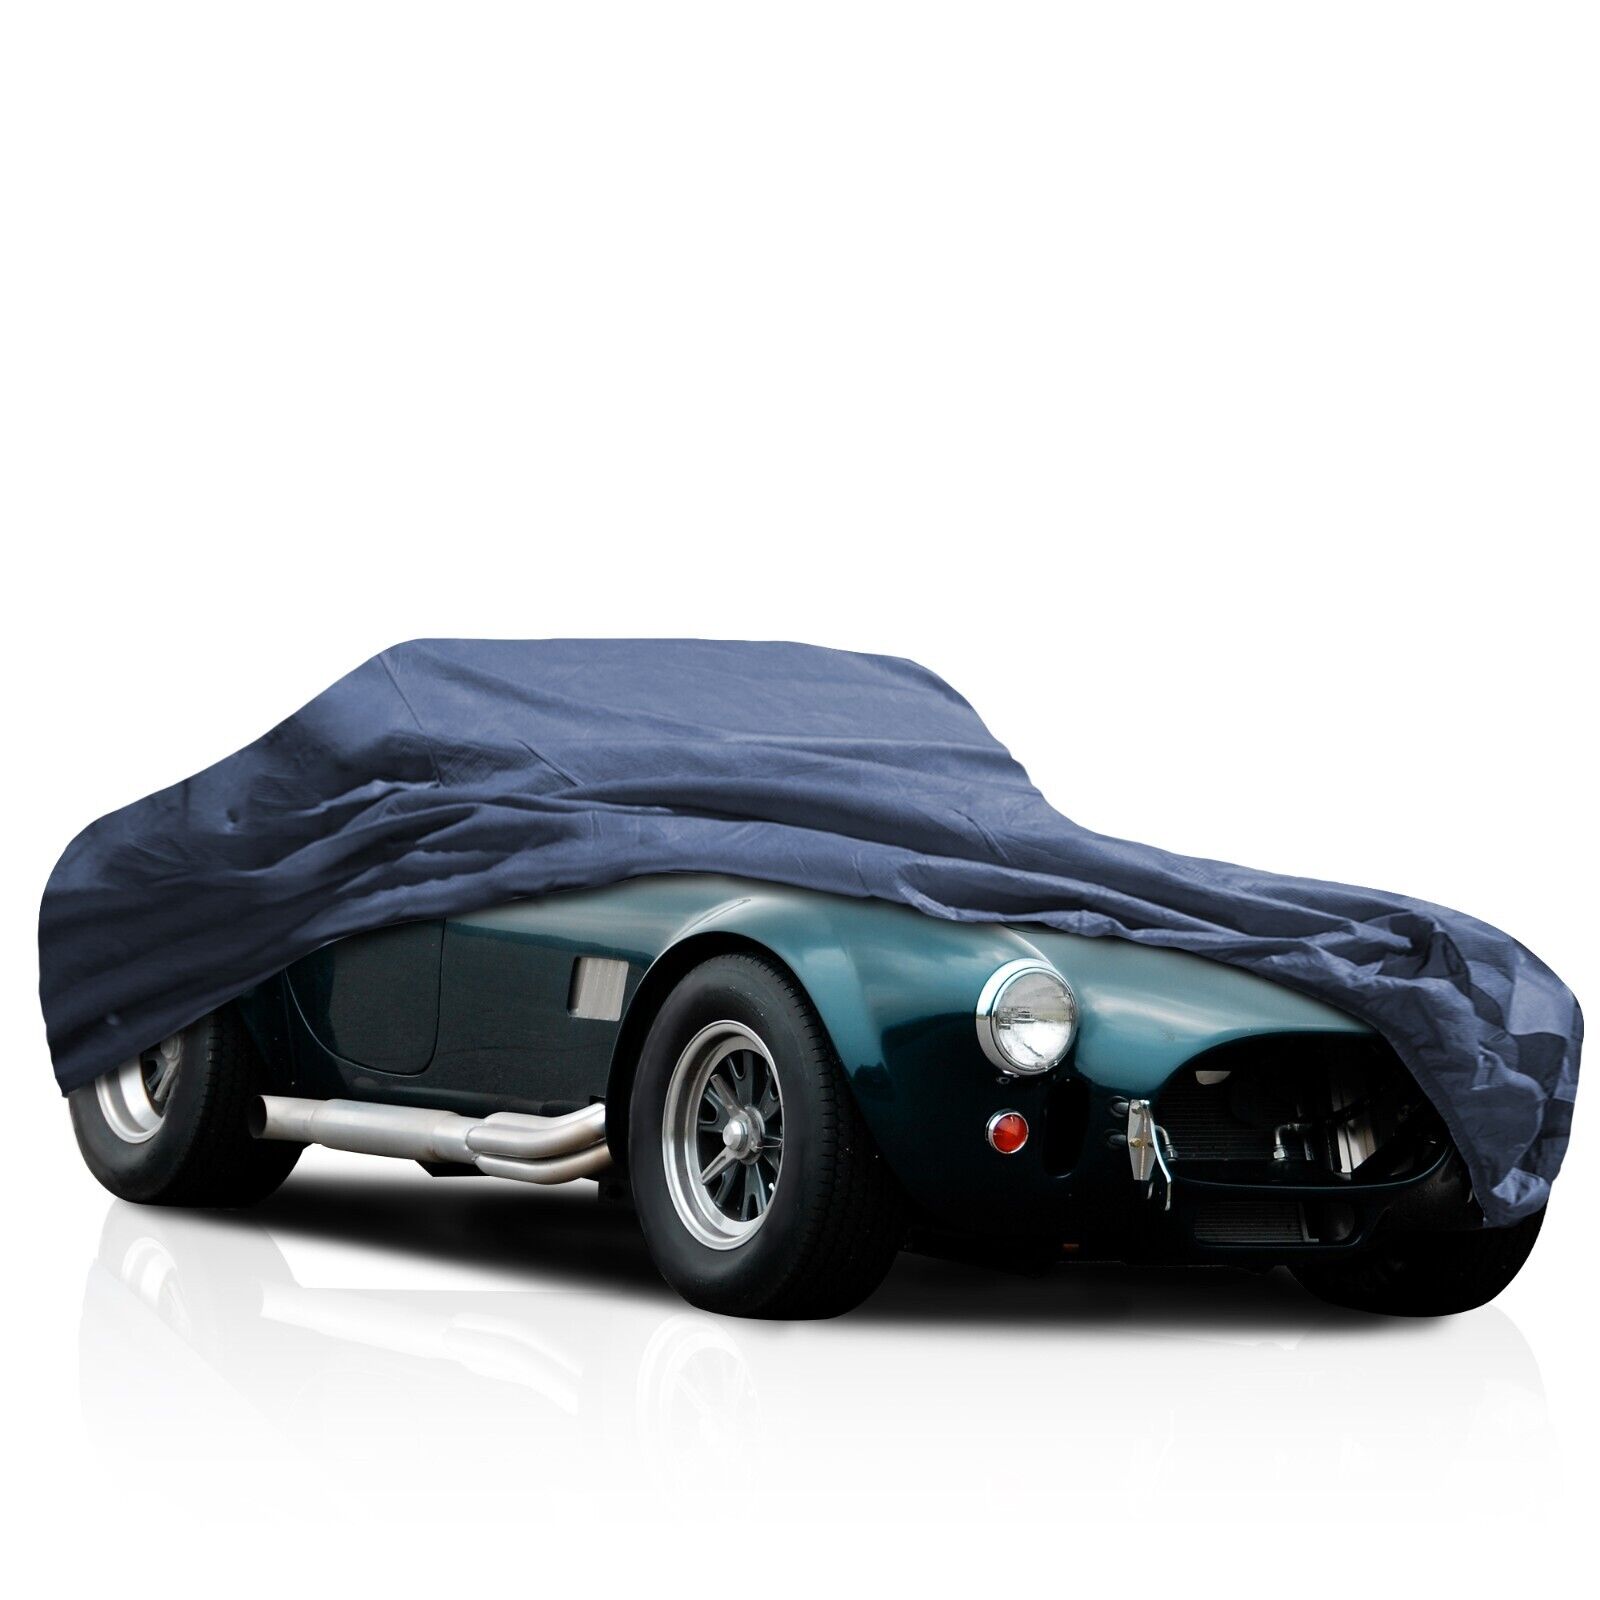 [CCT] 4 Layer Semi-Custom Fit Full Car Cover For AC Shelby Cobra 427 1962-1967